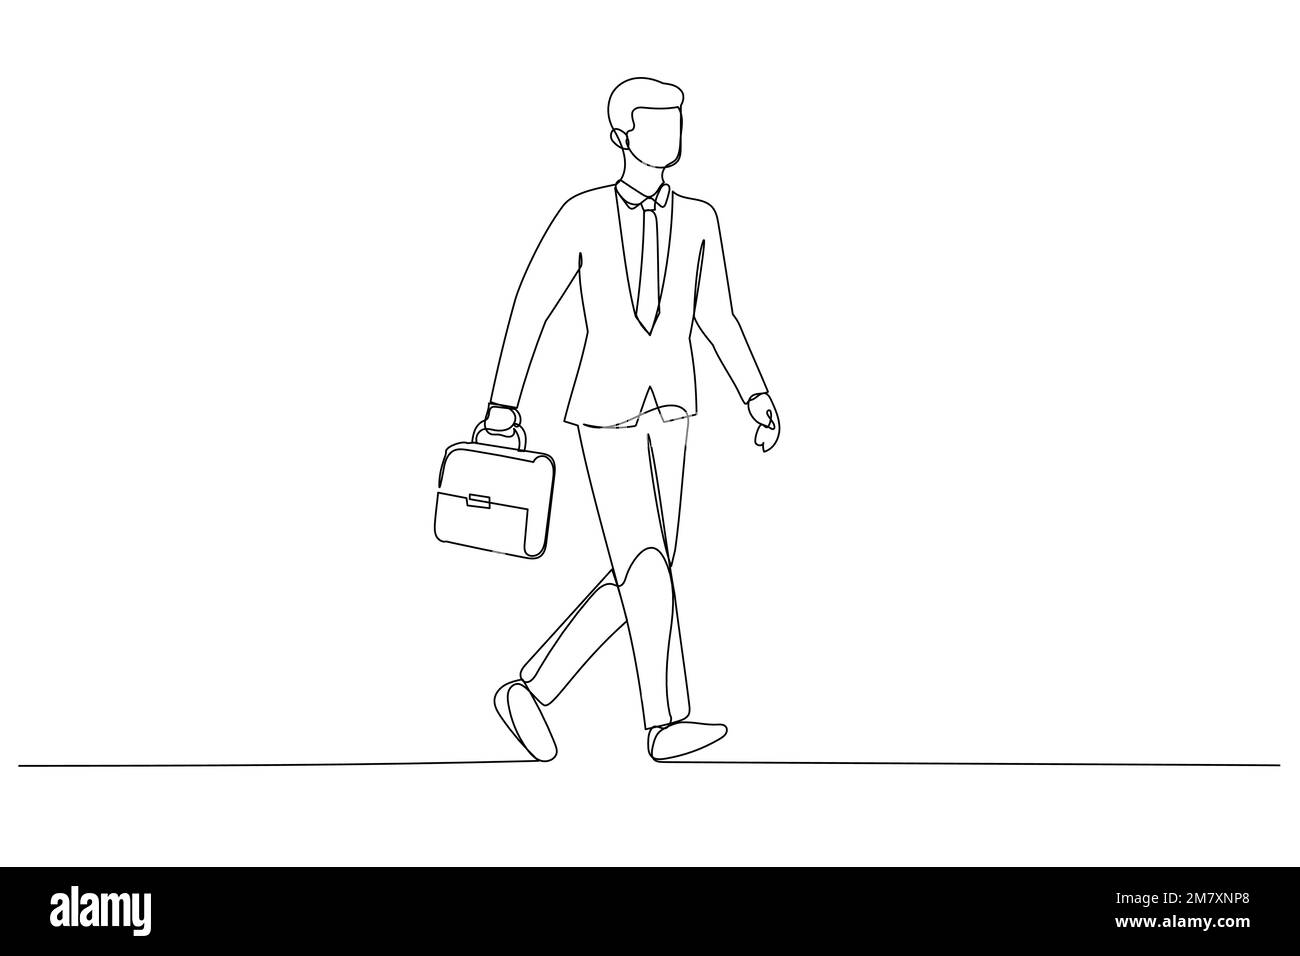 Illustration of businessman wearing glasses walking with briefcase on hand and looking ahead. Single line art style Stock Vector